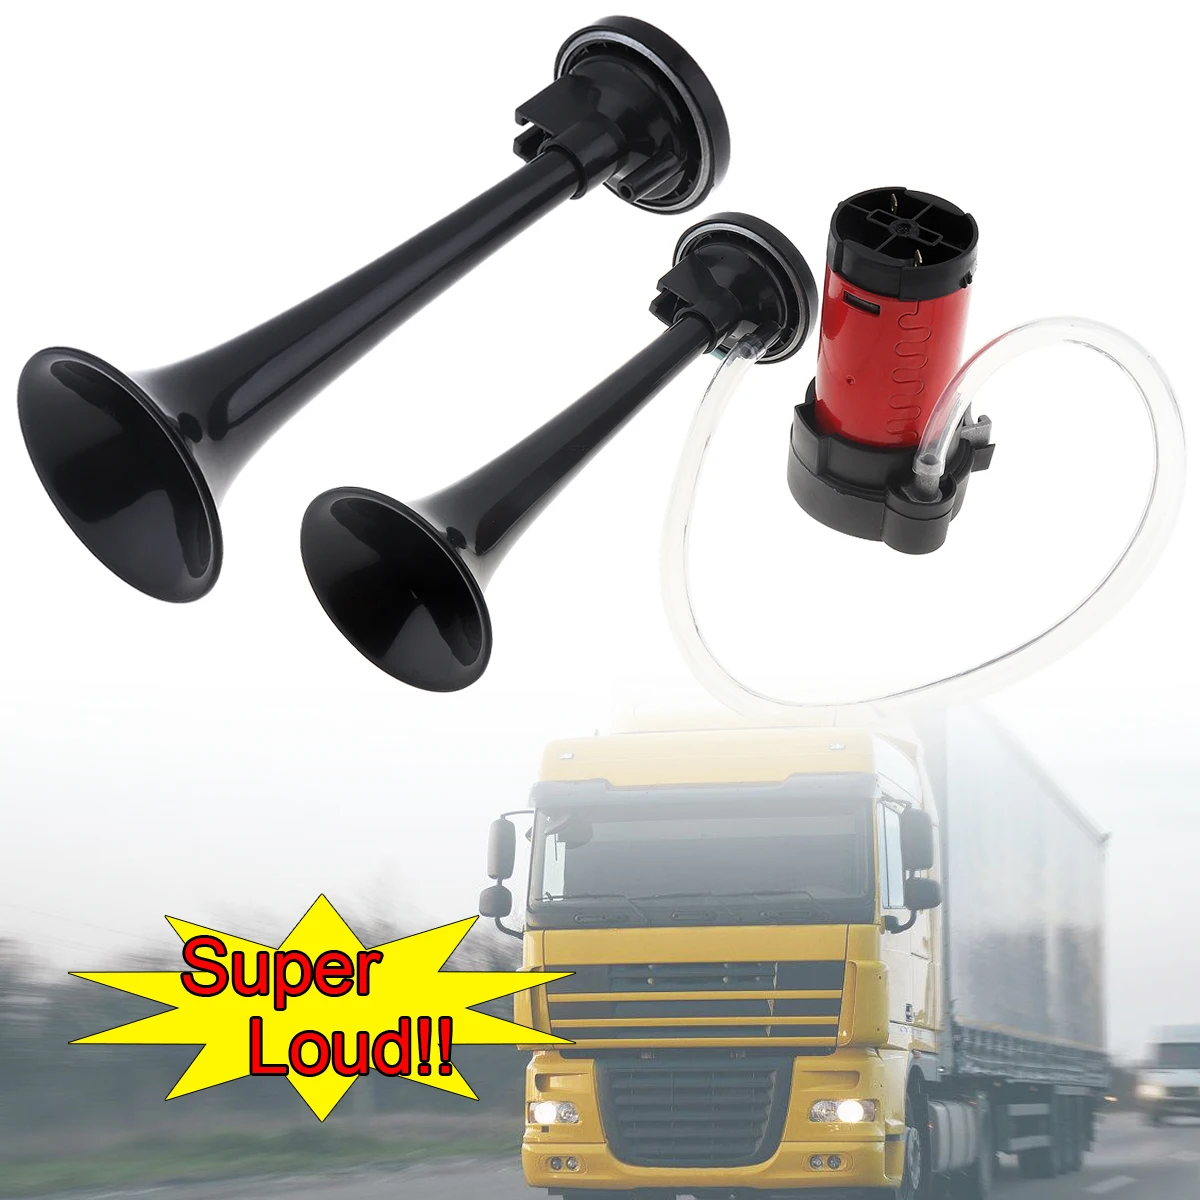 

12V 178DB Super Loud Dual Trumpet Electronically Controlled Car Air Horn with Compressor for Car Truck Boat Motorcycle Vehicle